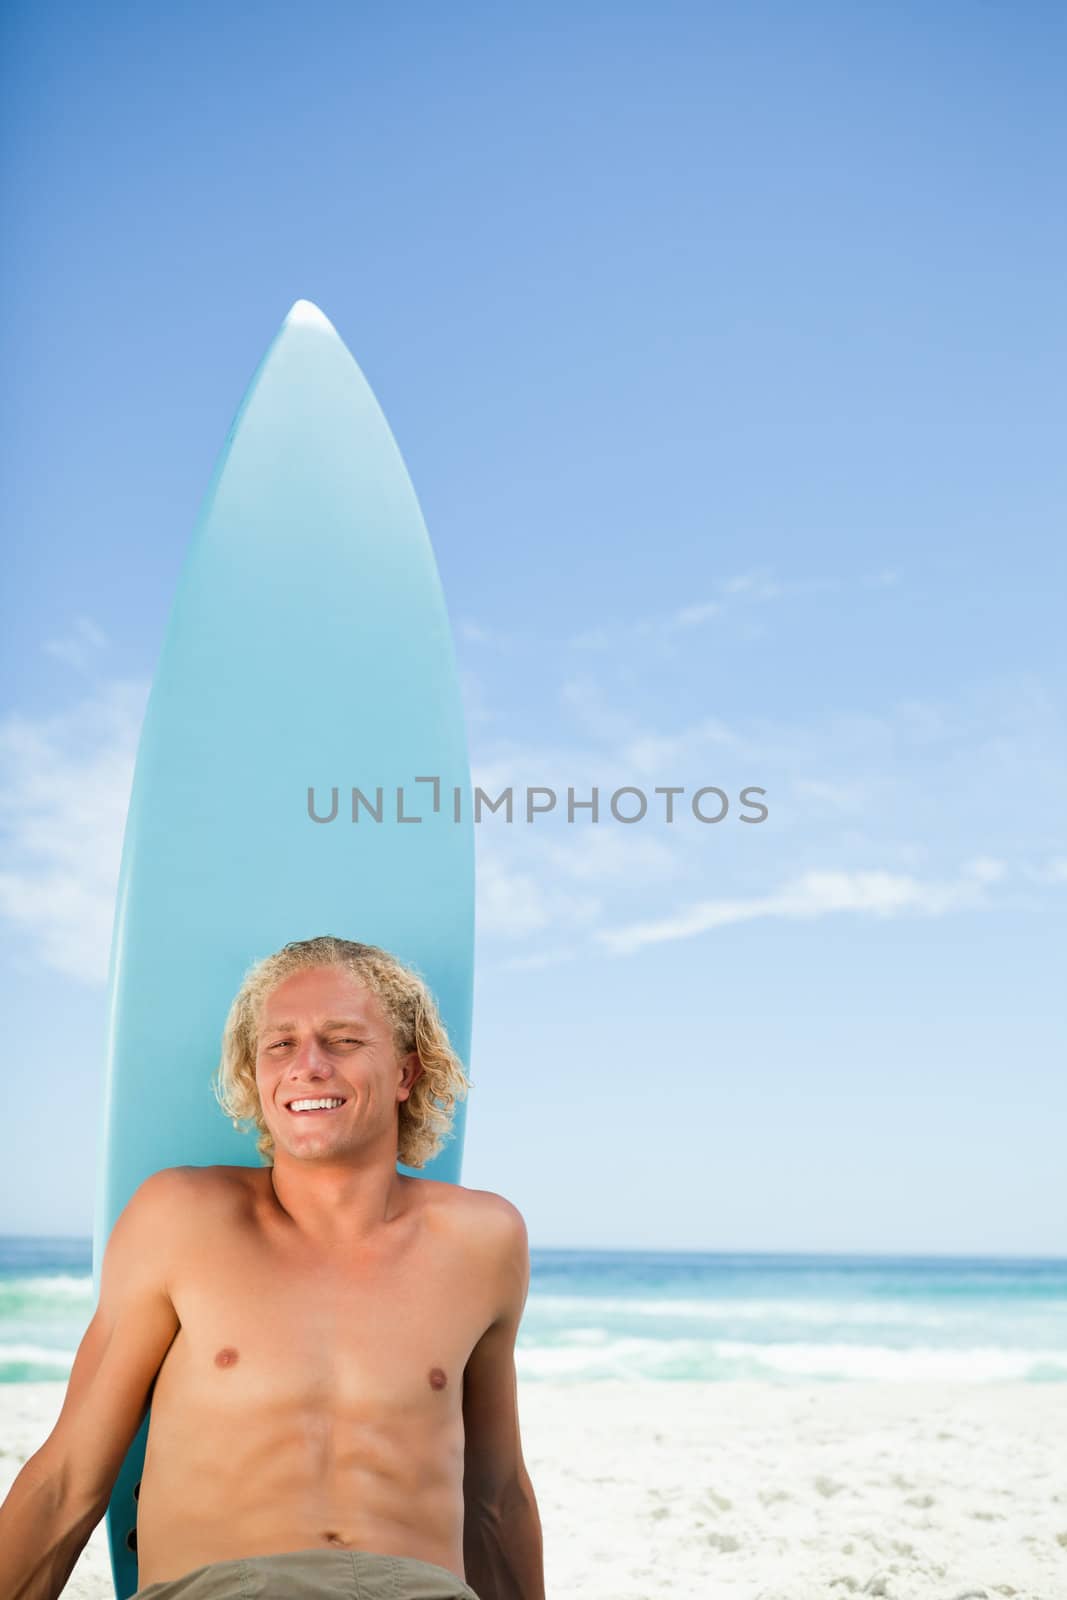 Smiling blonde man sunbathing with his blue surfboard near him